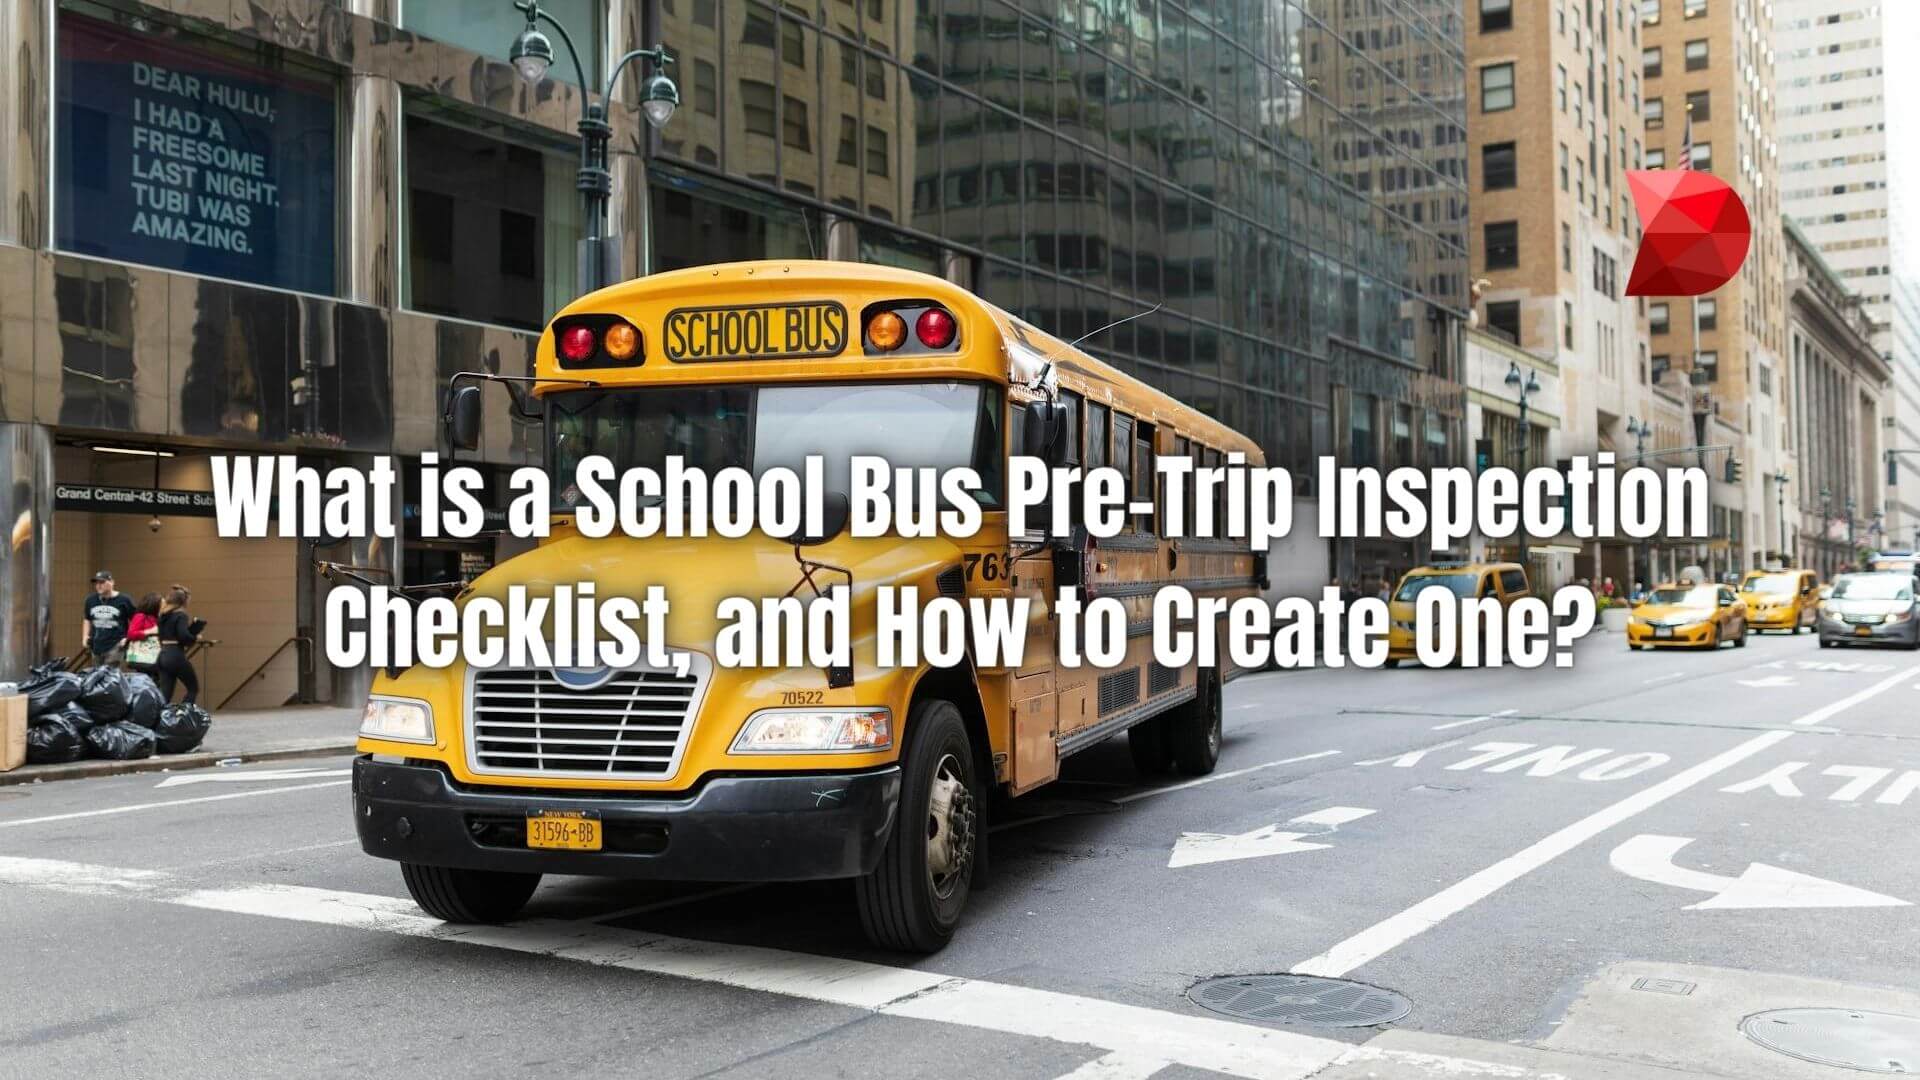 Master the essentials with our guide to the school bus pre-trip inspection checklist. Learn what to check and how to ensure a safe trip.